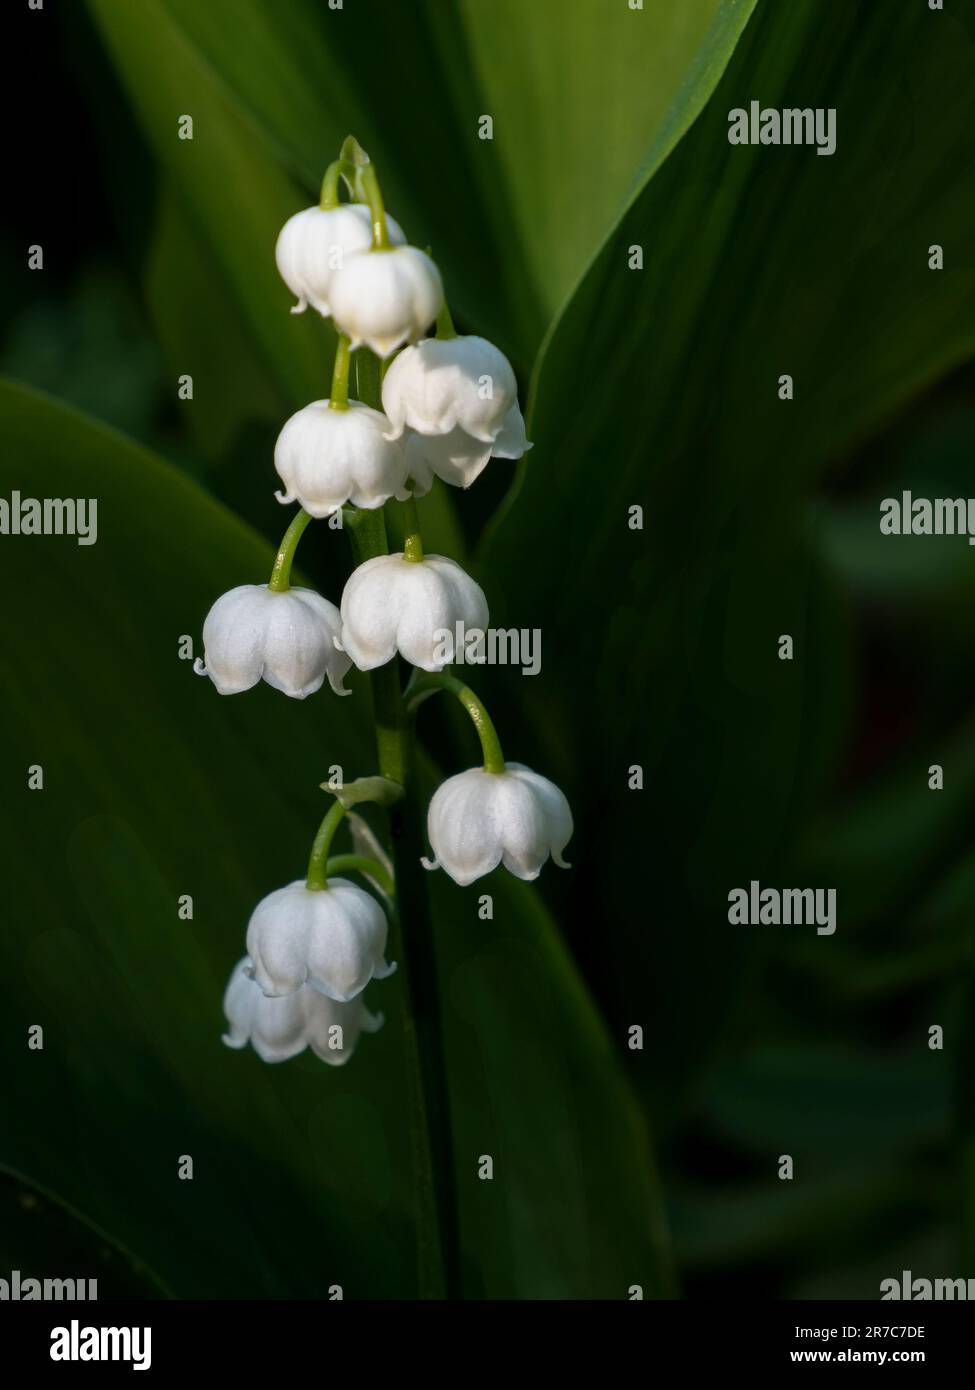 Stem of flowers of Lily of the valley on the dark green foliage background Stock Photo